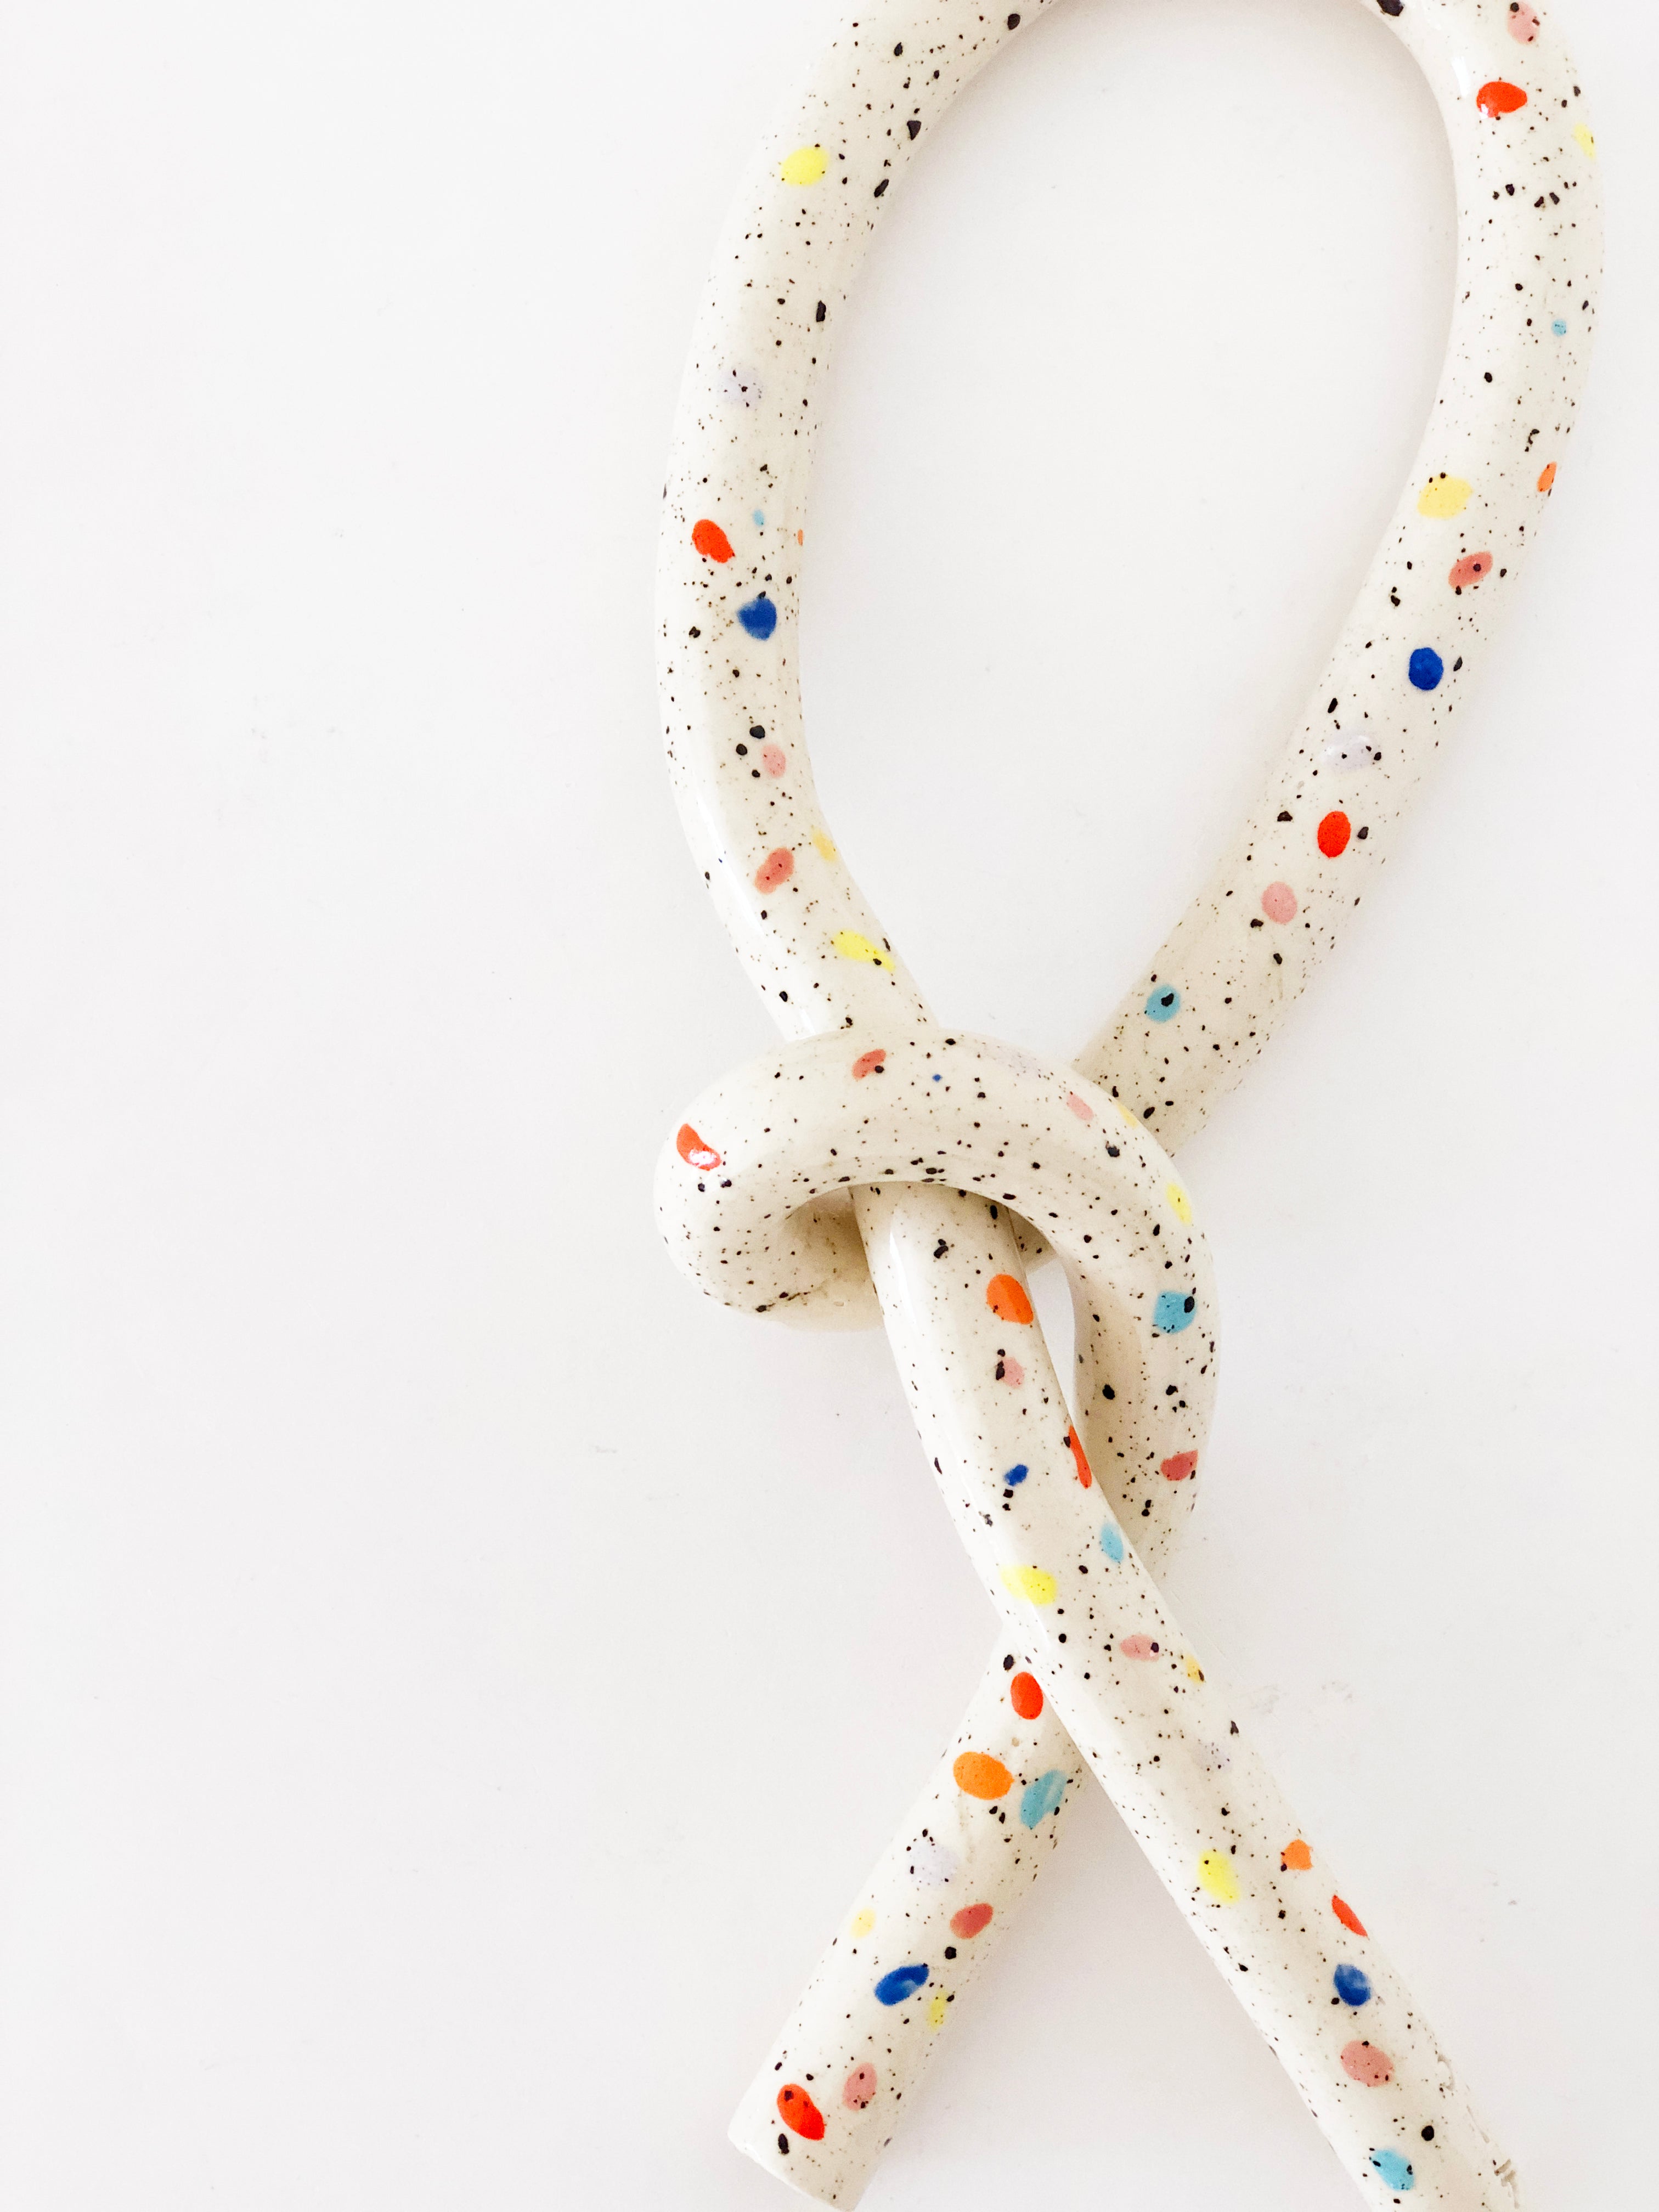 Clay Object 11 - Double Sprinkles Knot